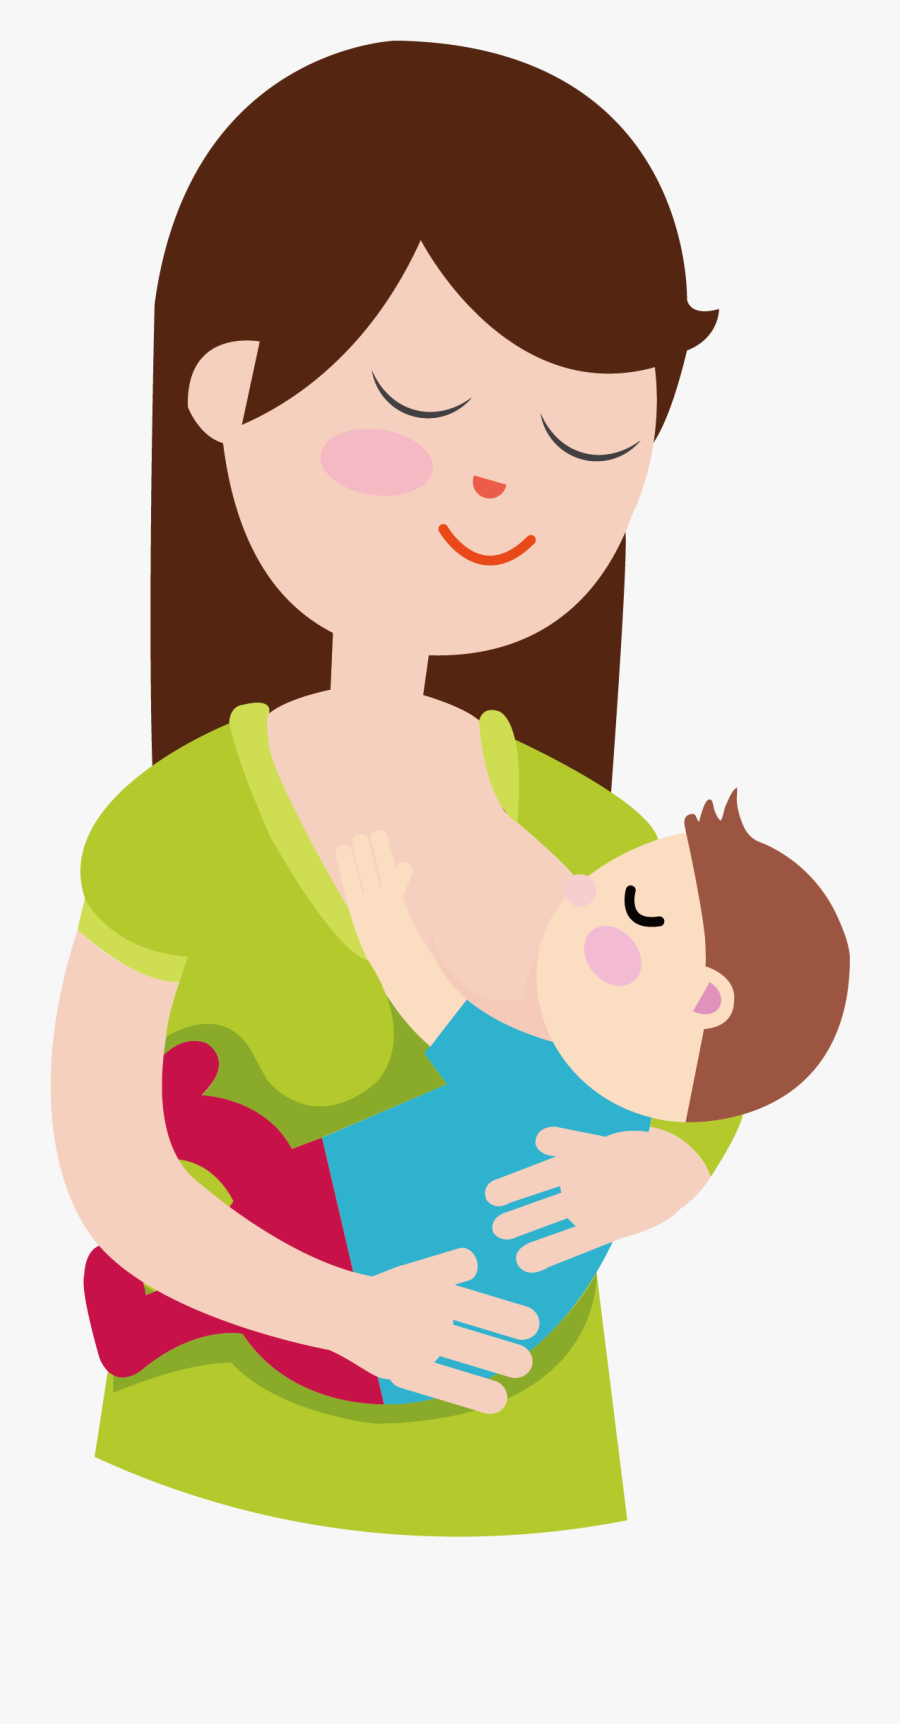 Mothers Day Wallpaper Transprent - Woman Holding Baby Cartoon Transparent Background, Transparent Clipart